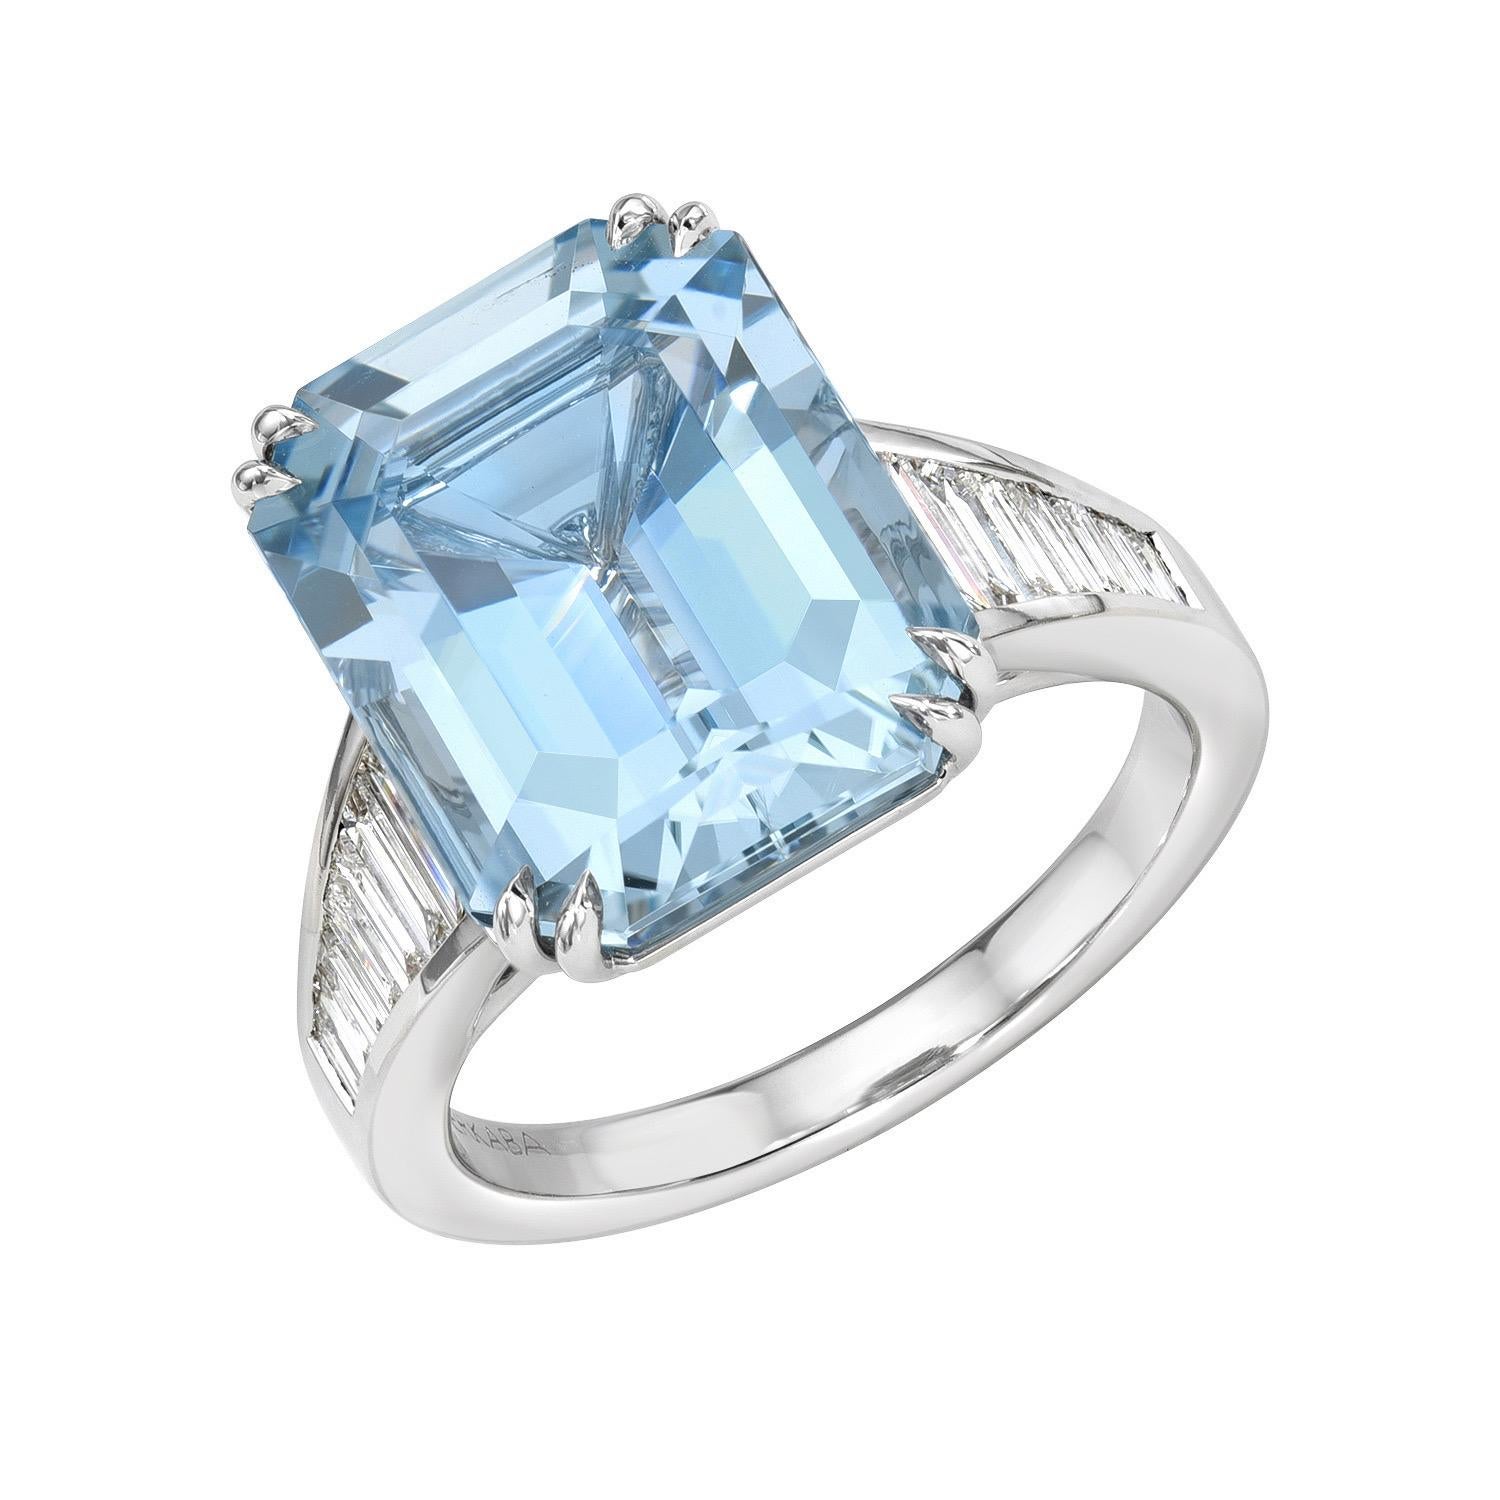 Spectacular 8.01 carat Aquamarine Emerald-Cut, 18K white gold ring, decorated with a total of 0.75 carat collection baguette diamonds.
Ring size 6.5. Resizing is complementary upon request.
Returns are accepted and paid by us within 7 days of